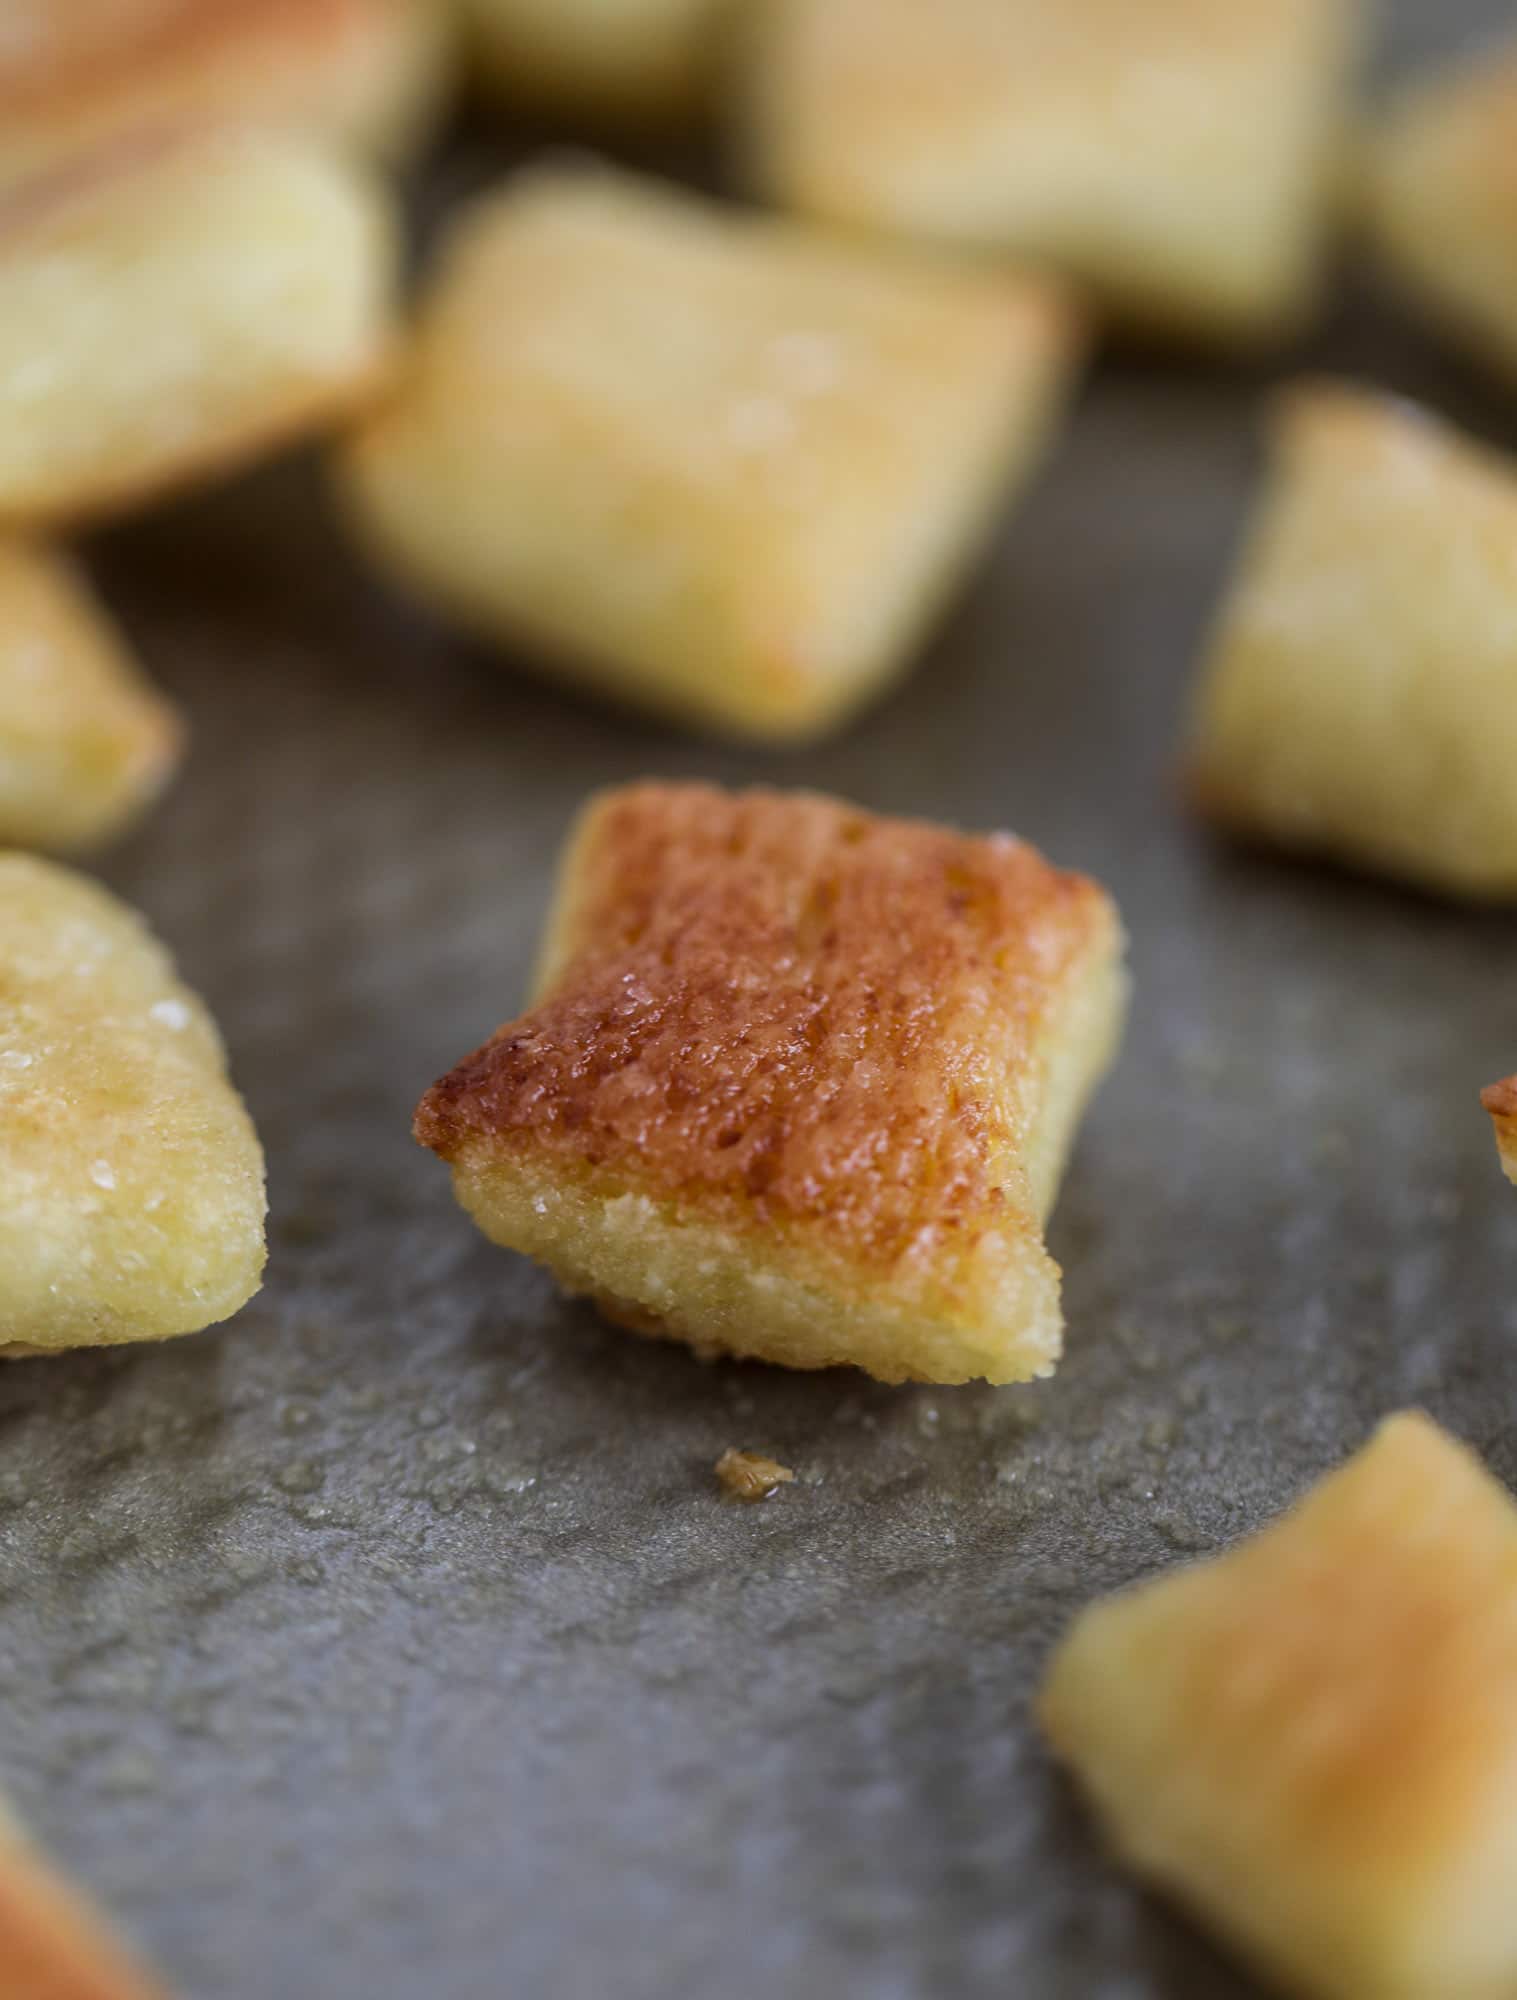 Homemade cauliflower gnocchi that tastes just like the Trader Joe's version! It's made with cauliflower, comes together fast and is super easy! I howsweeteats.com #cauliflower #gnocchi